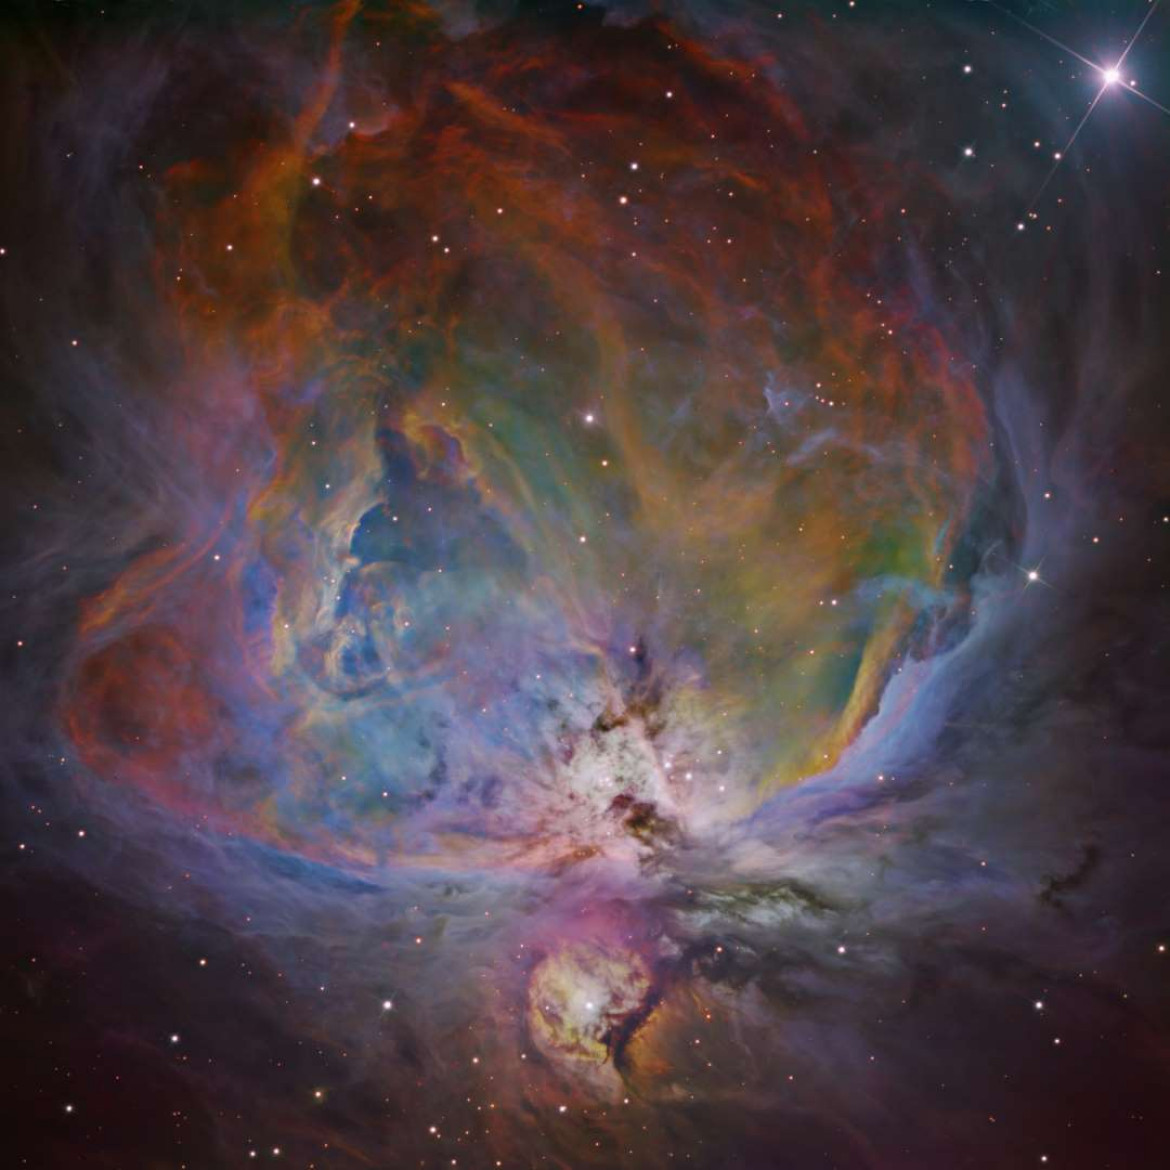 fot. Bernand Miller, "The Orion Nebula in 6-filter Narrowband" / Insight Investment Astronomy Photographer of the Year 2018